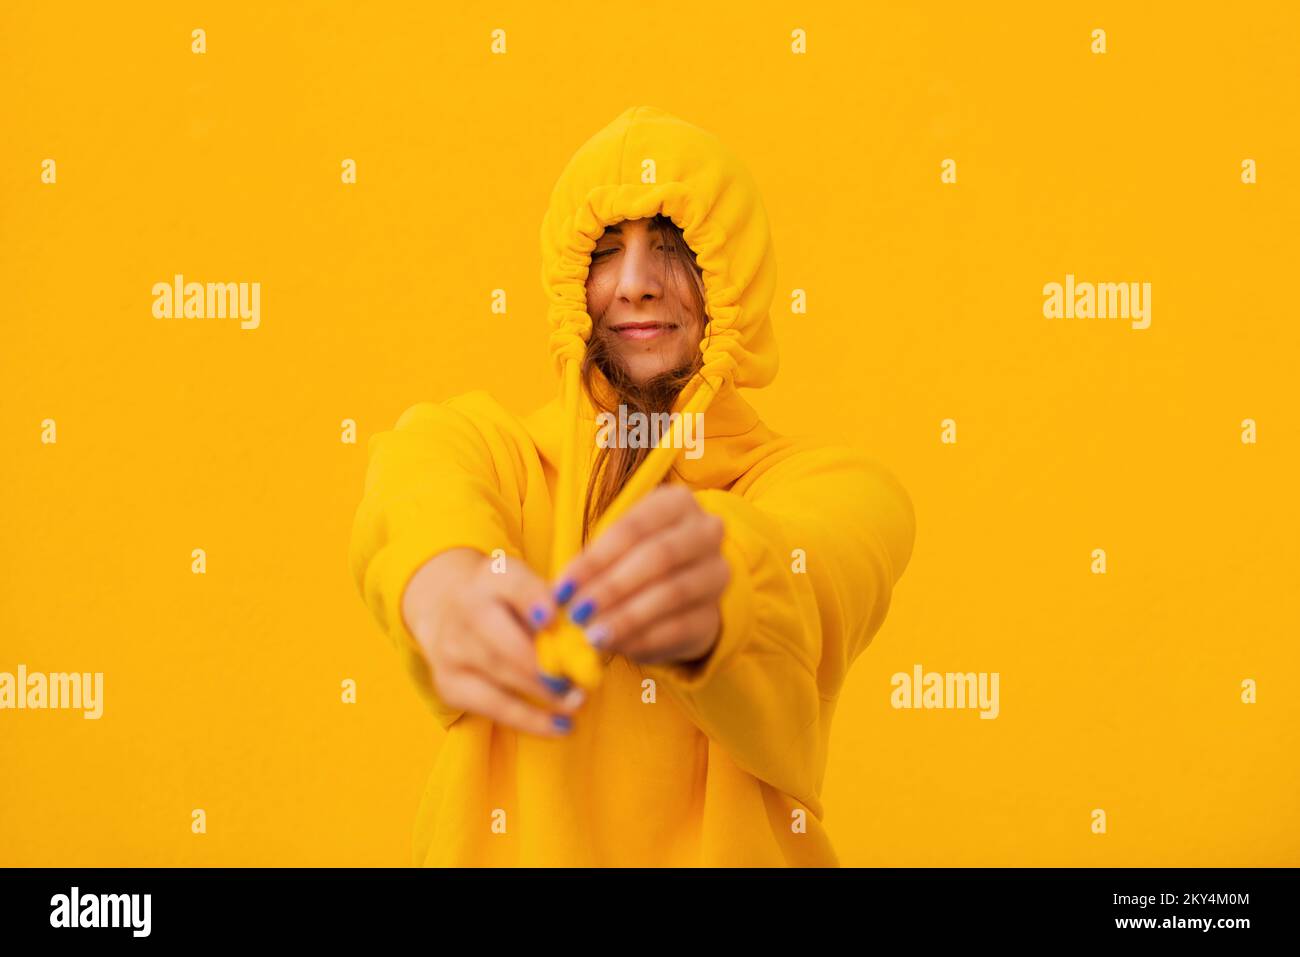 Cheerful casual young woman in a yellow hoodie is having fun on a colorful yellow background Stock Photo